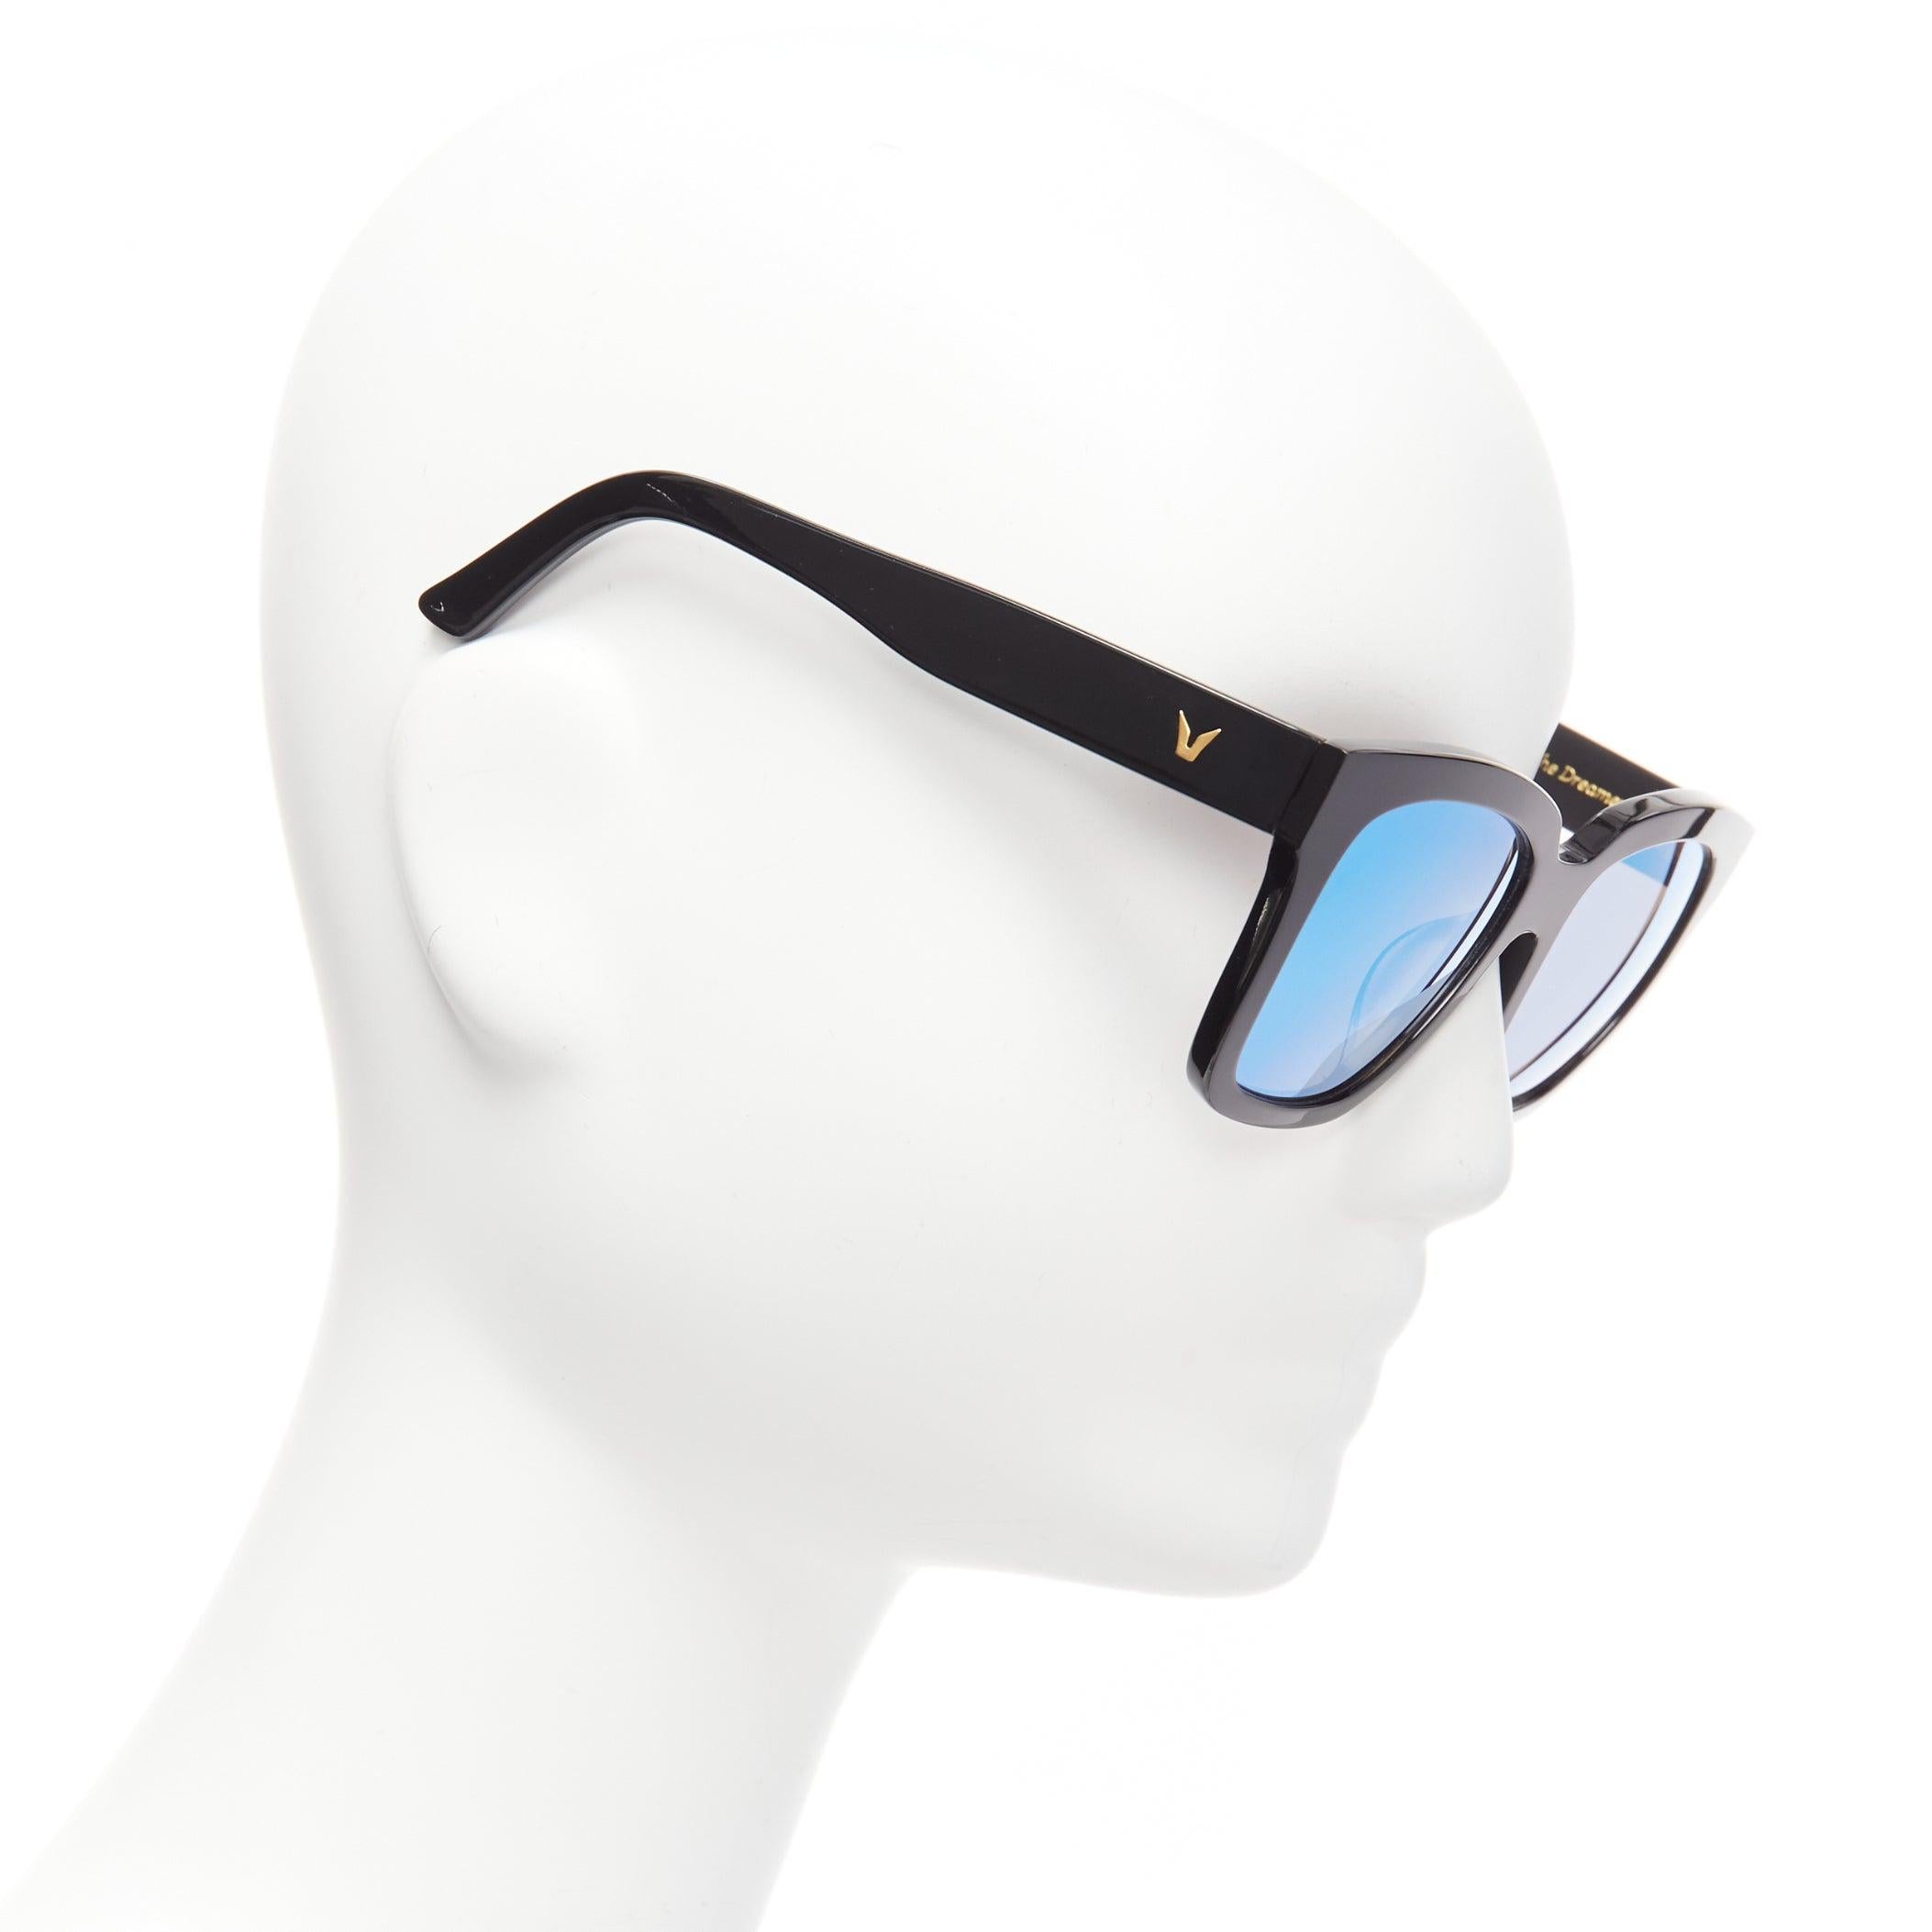 GENTLE MONSTER The Dreamer black frame reflective blue lens oversized sunglasses
Reference: NKLL/A00075
Brand: Gentle Monster
Model: The Dreamer
Material: Plastic
Color: Black, Blue
Pattern: Solid
Made in: China

CONDITION:
Condition: Excellent,